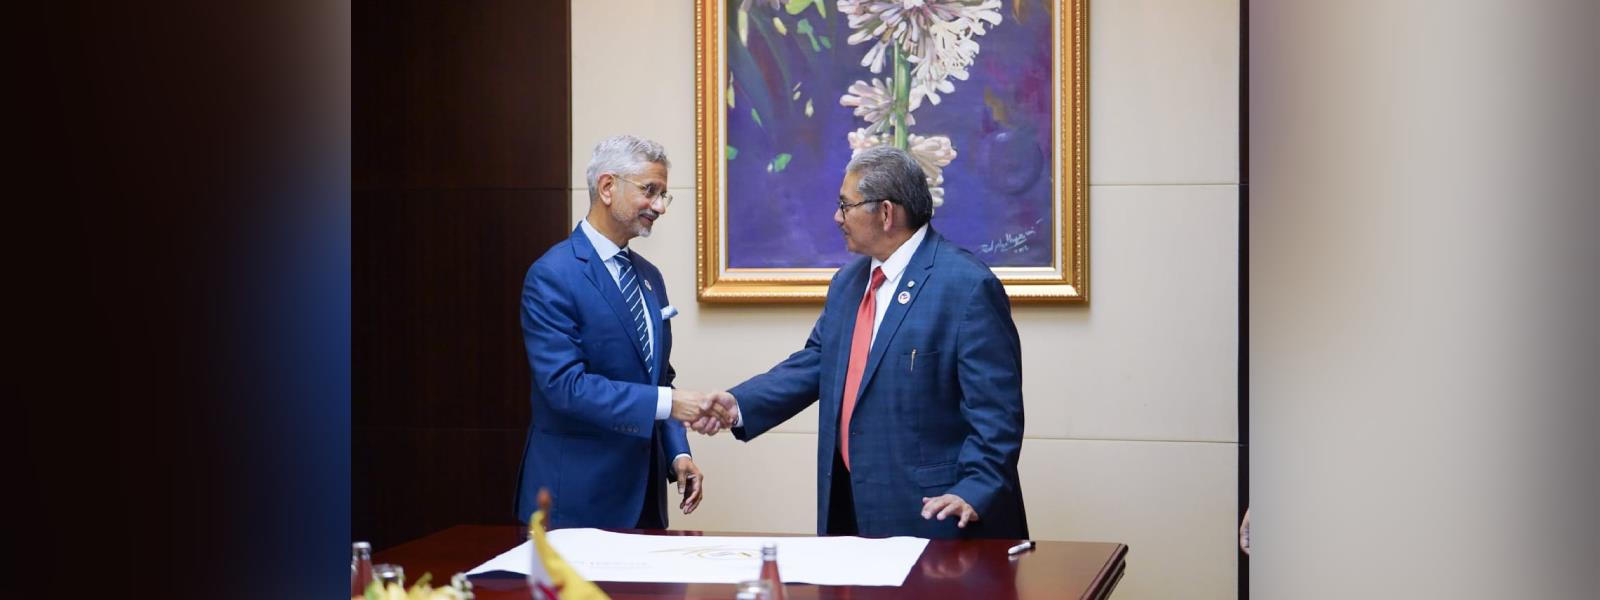 External Affairs Minister Dr. S. Jaishankar met H.E. Dato Erywan Pehin Yusof, Foreign Minister of Brunei on the sidelines of ASEAN meetings in Vientiane